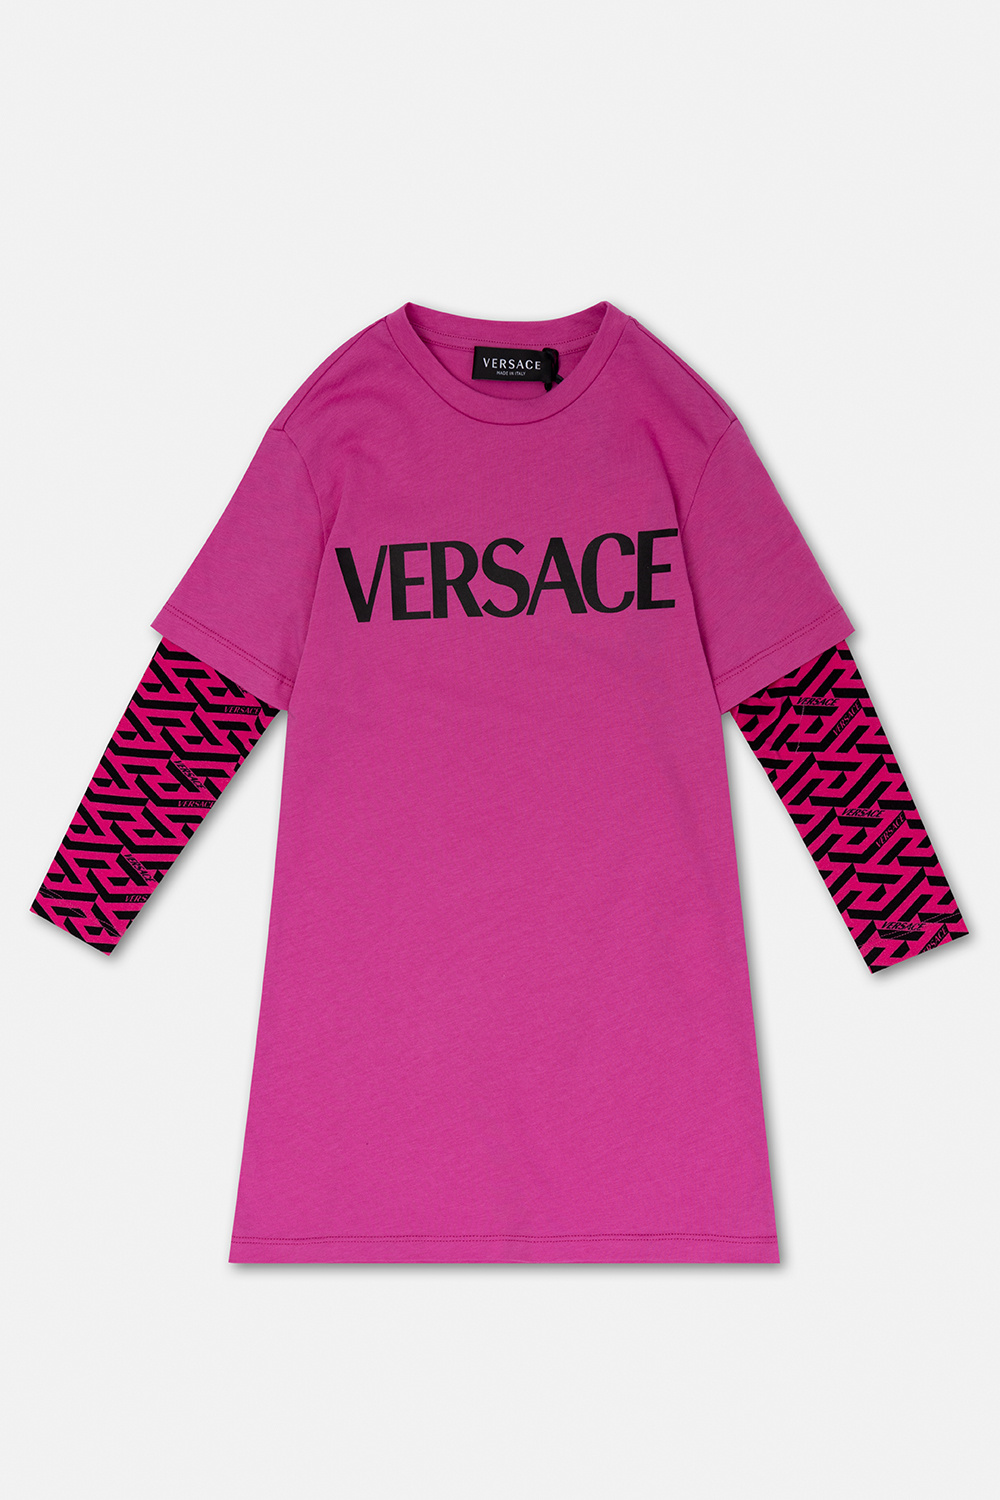 Versace Kids Excellent knickers for under leggings